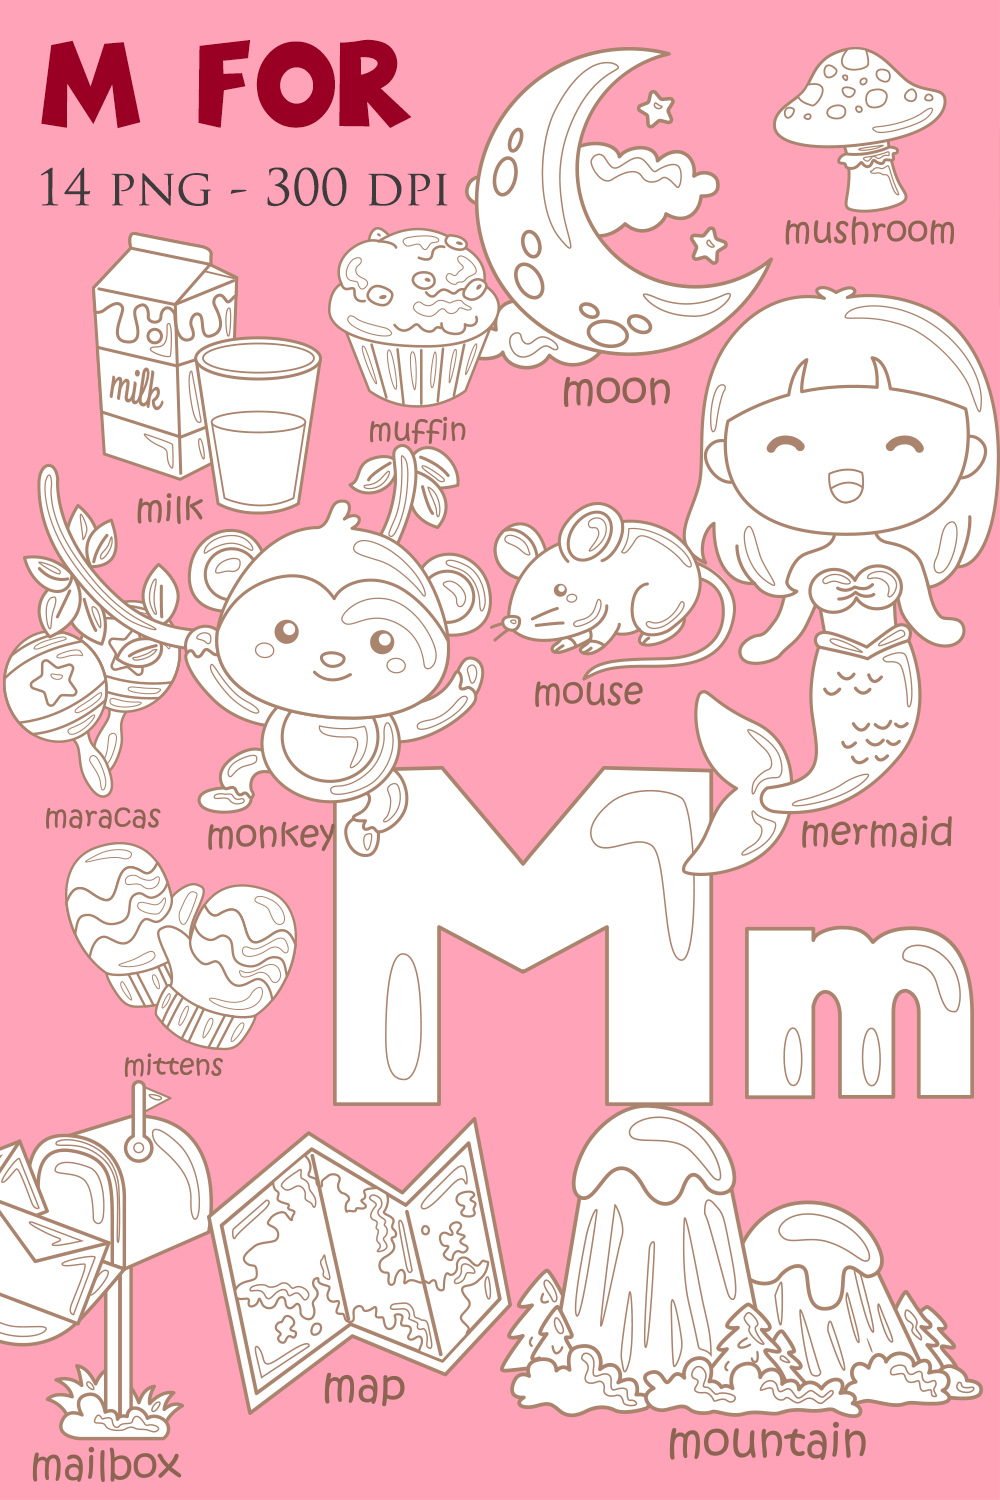 Alphabet M For Vocabulary School Letter Reading Writing Font Study Learning Student Toodler Kids Cartoon Mouse Monkey Mermaid Mountain Milk Mushroom Mittens Mailbox Moon Maracas Muffin Map Digital Stamp Outline Black and White pinterest preview image.